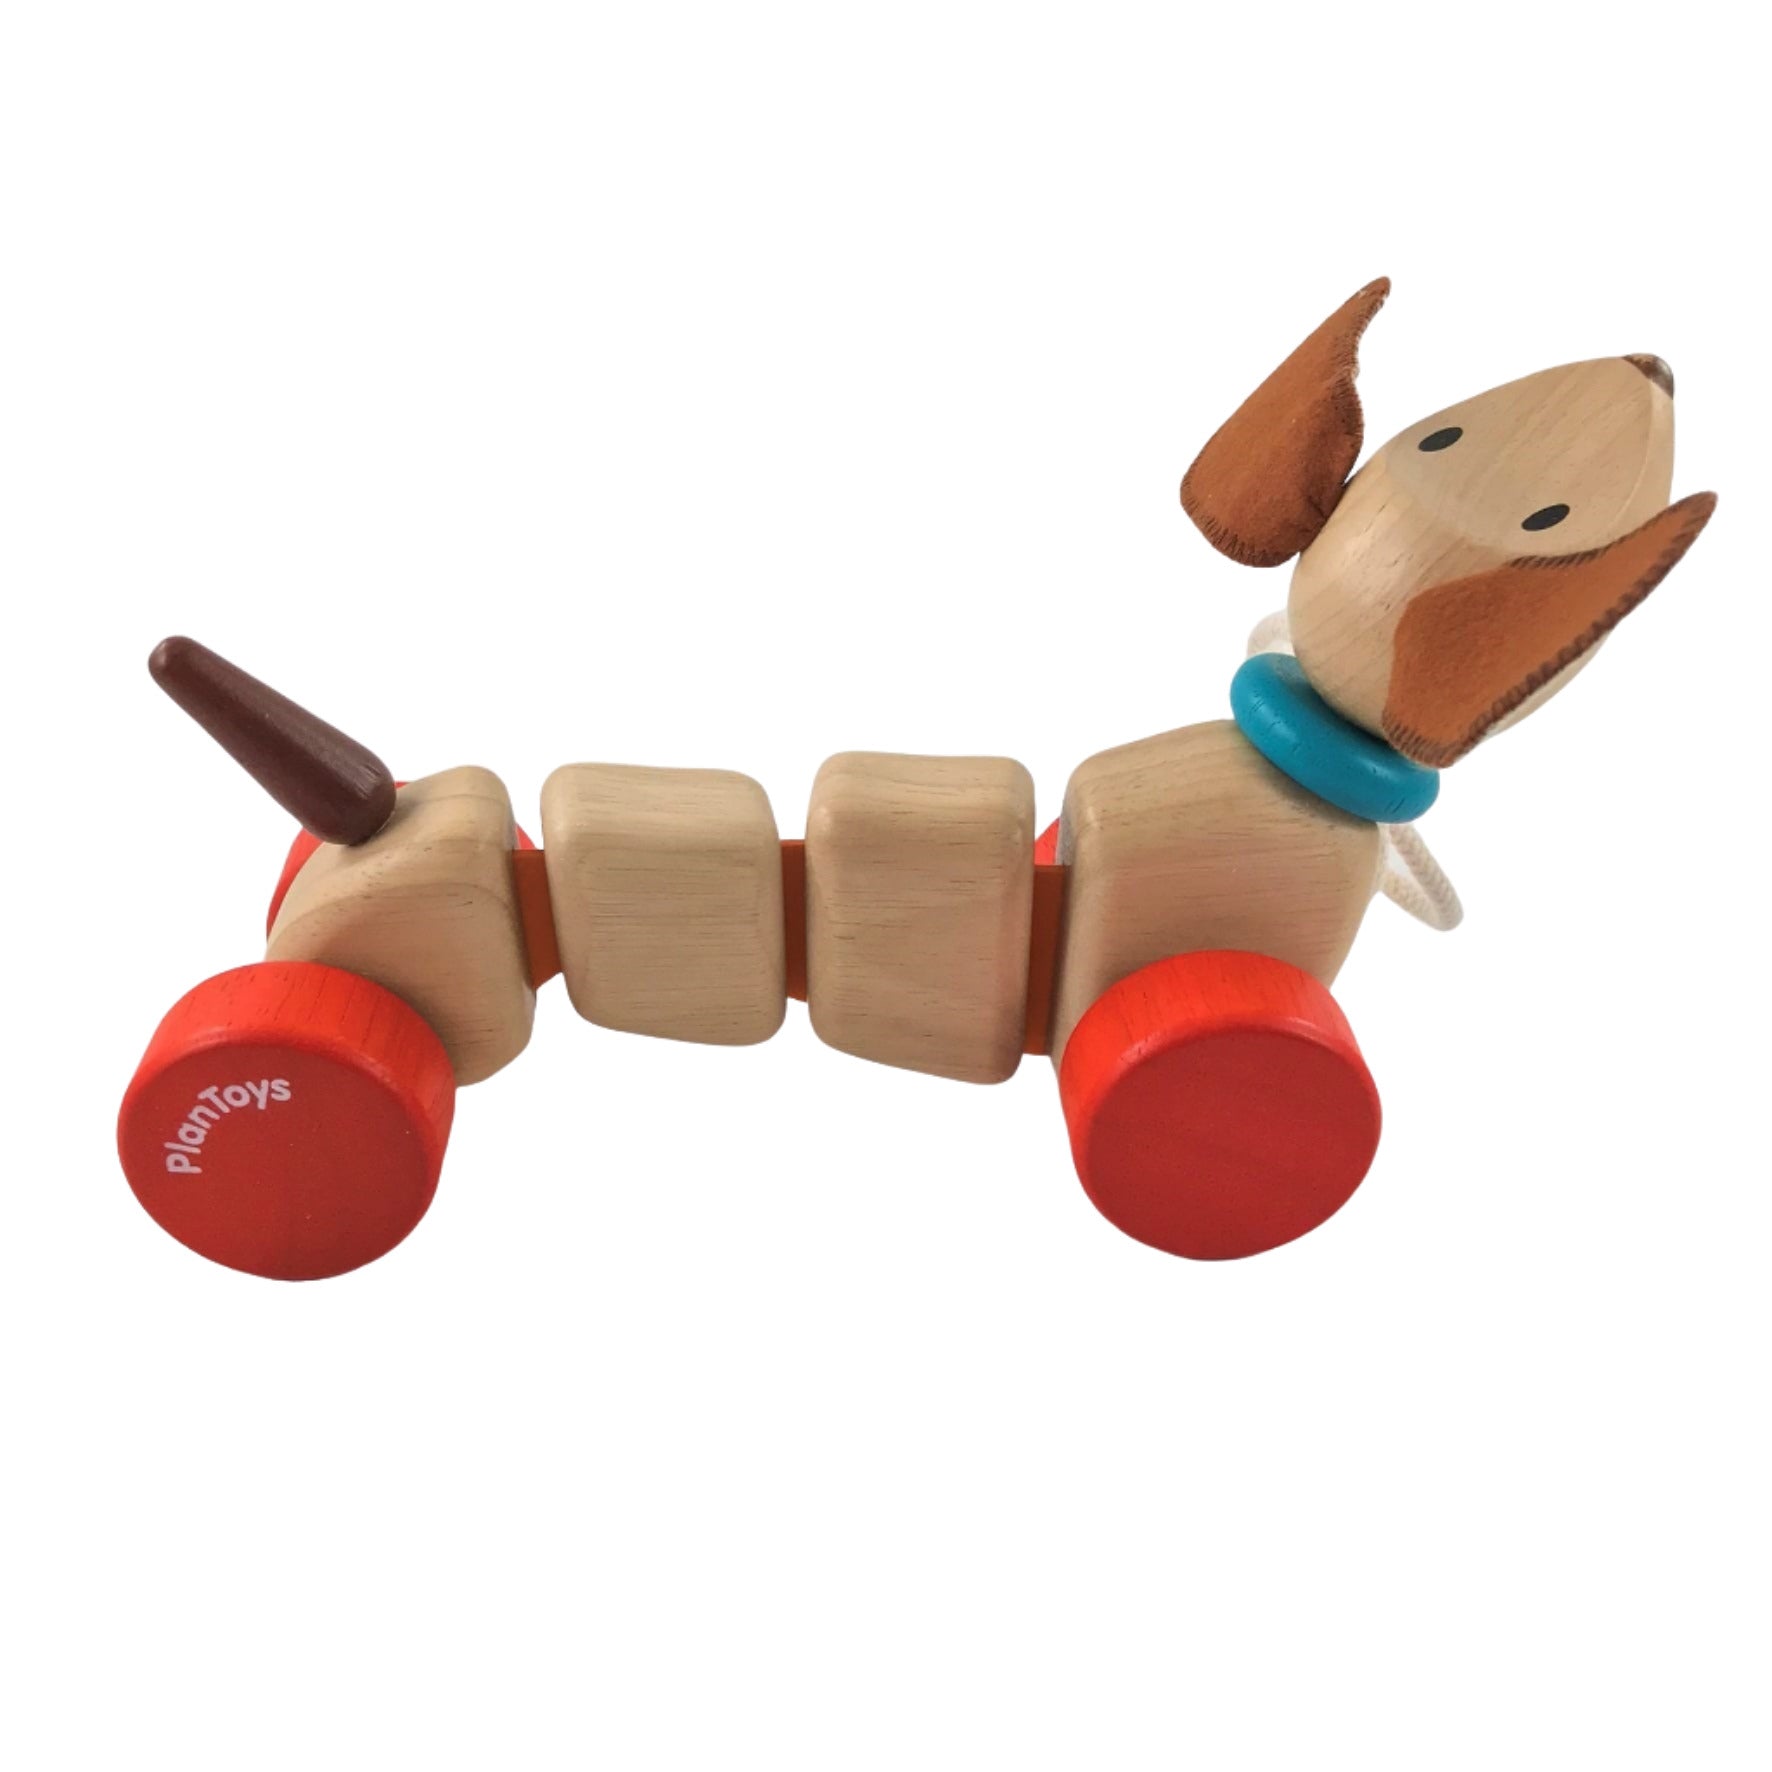 Natural wood wheel along puppy dog with red wheels and brown felt ears